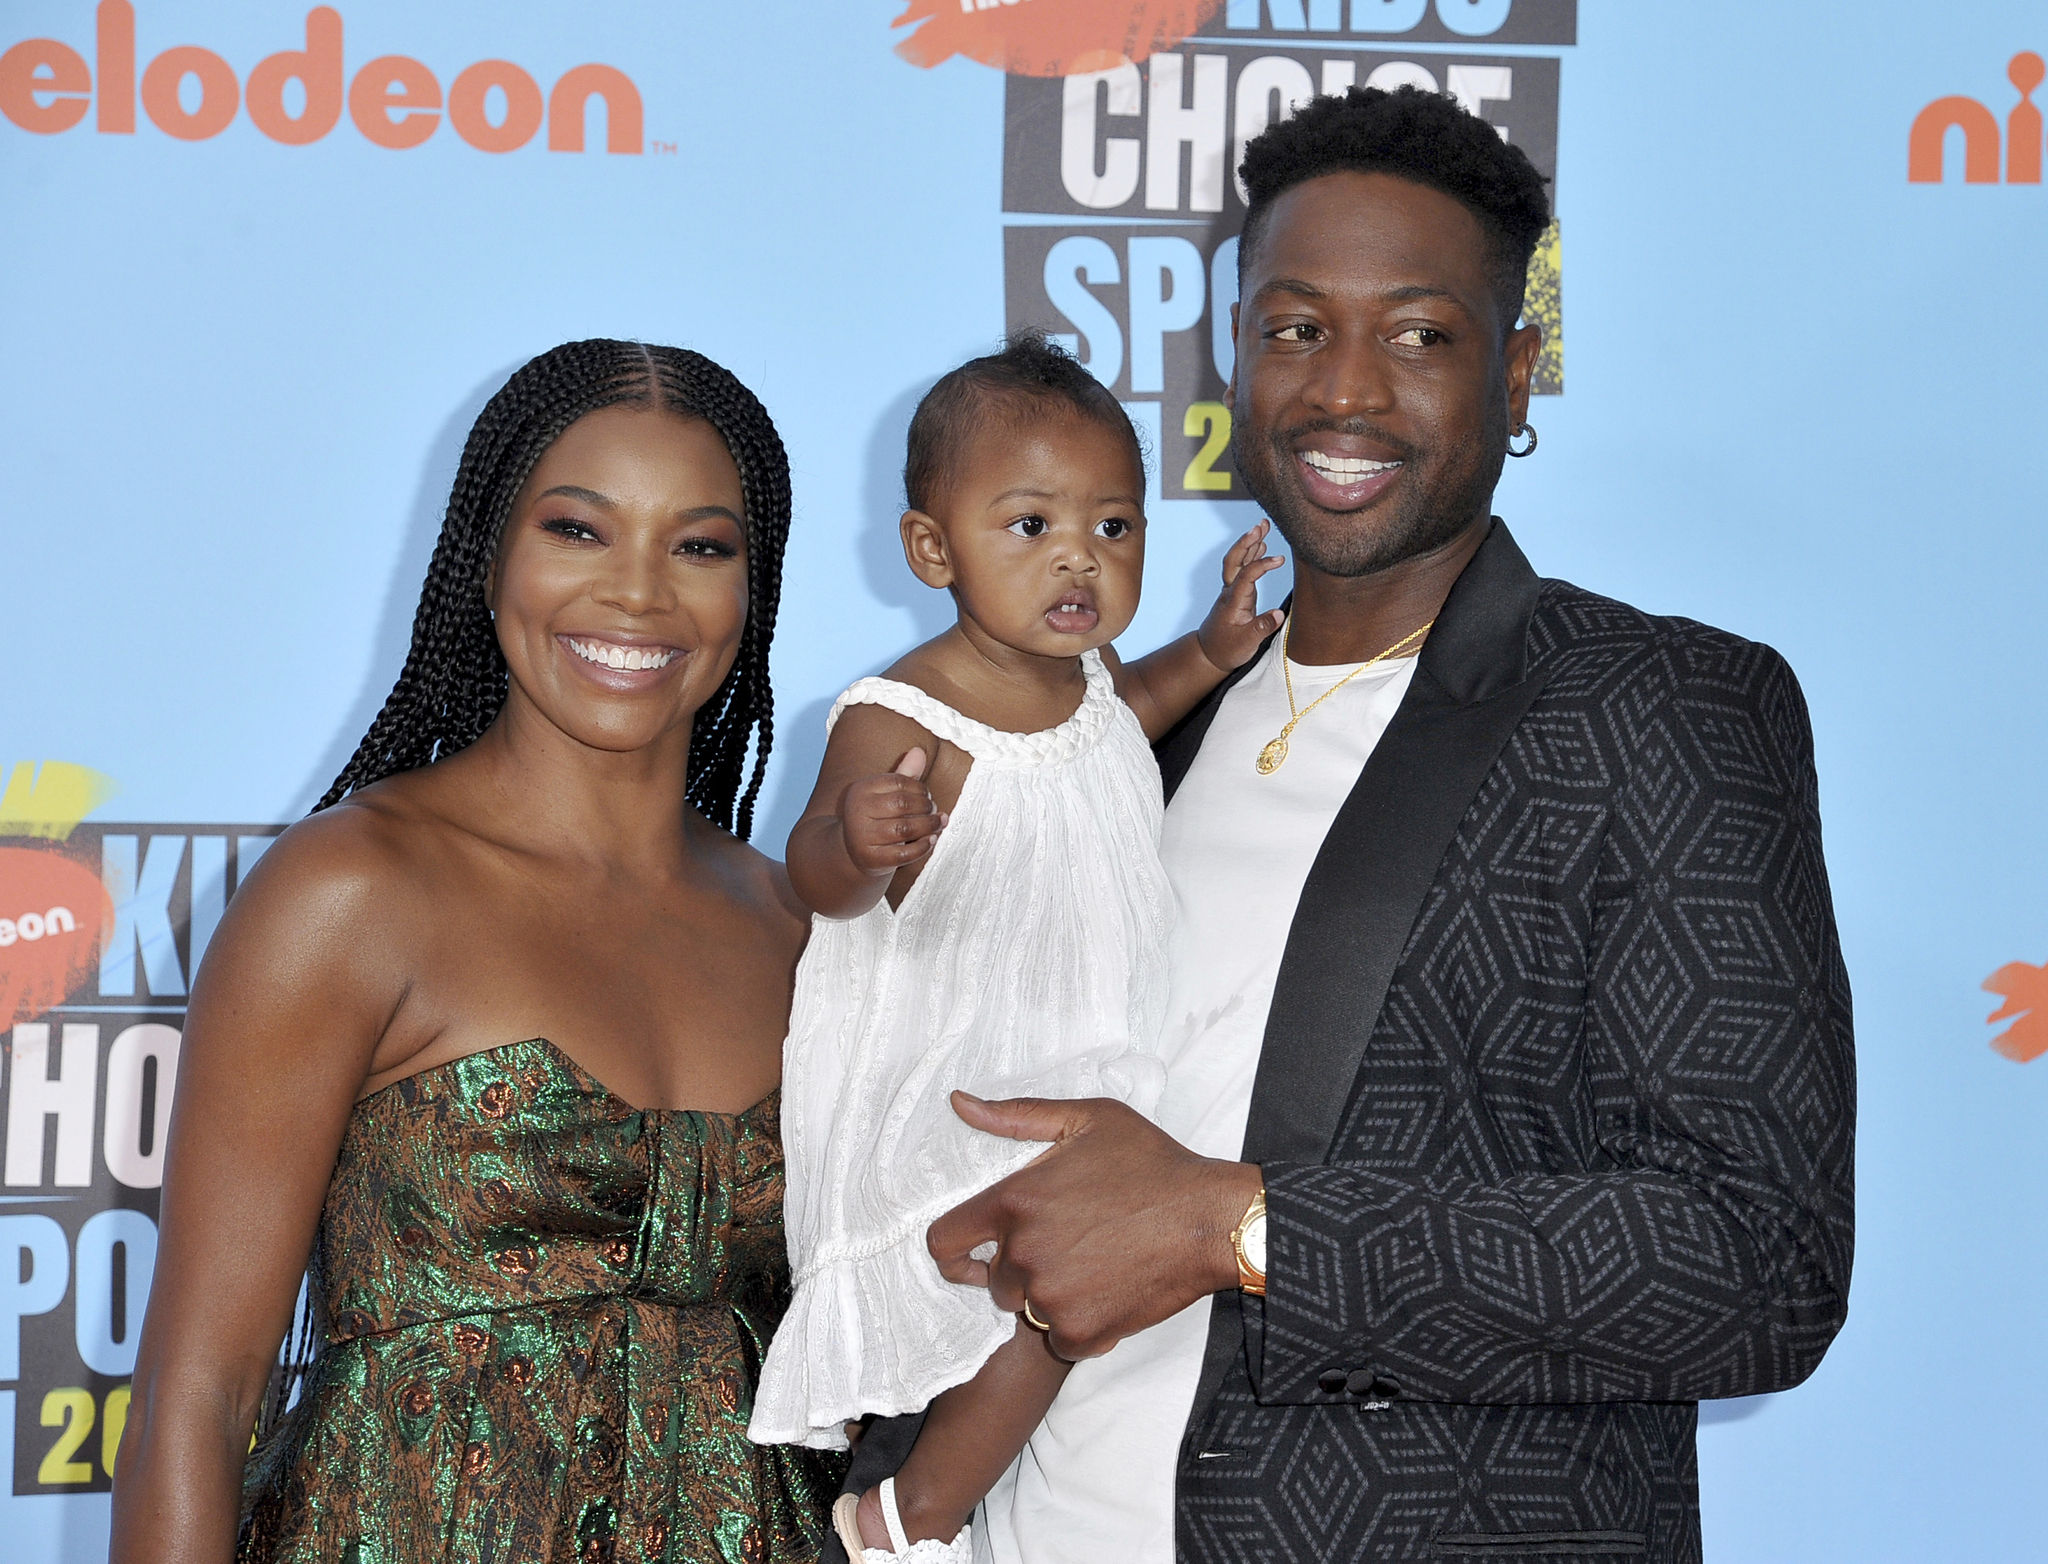 Gabrielle Union, left, Dwyane Wade, right, and their daughter Kaavia James Union Wade